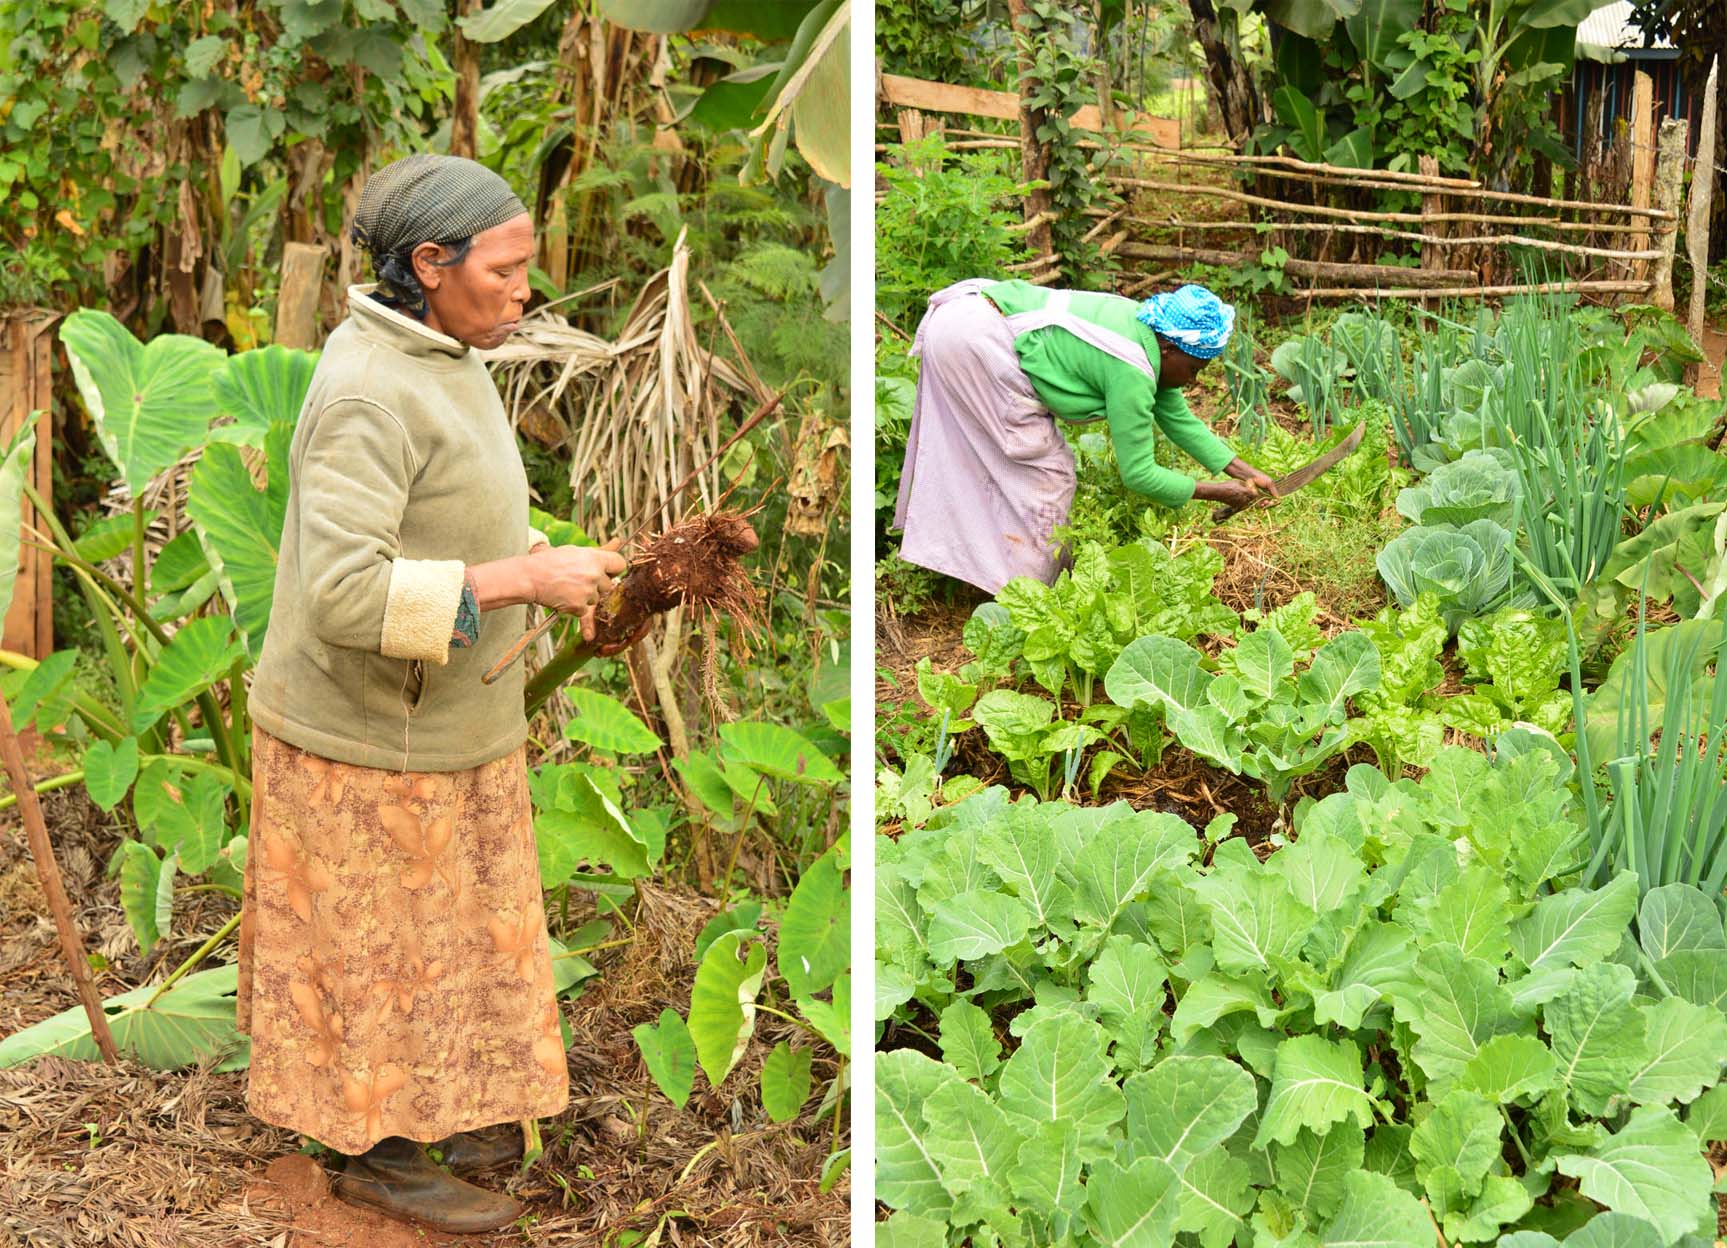 One of the women harvests some arrow roots from her farm, while another tends to her kitchen garden 